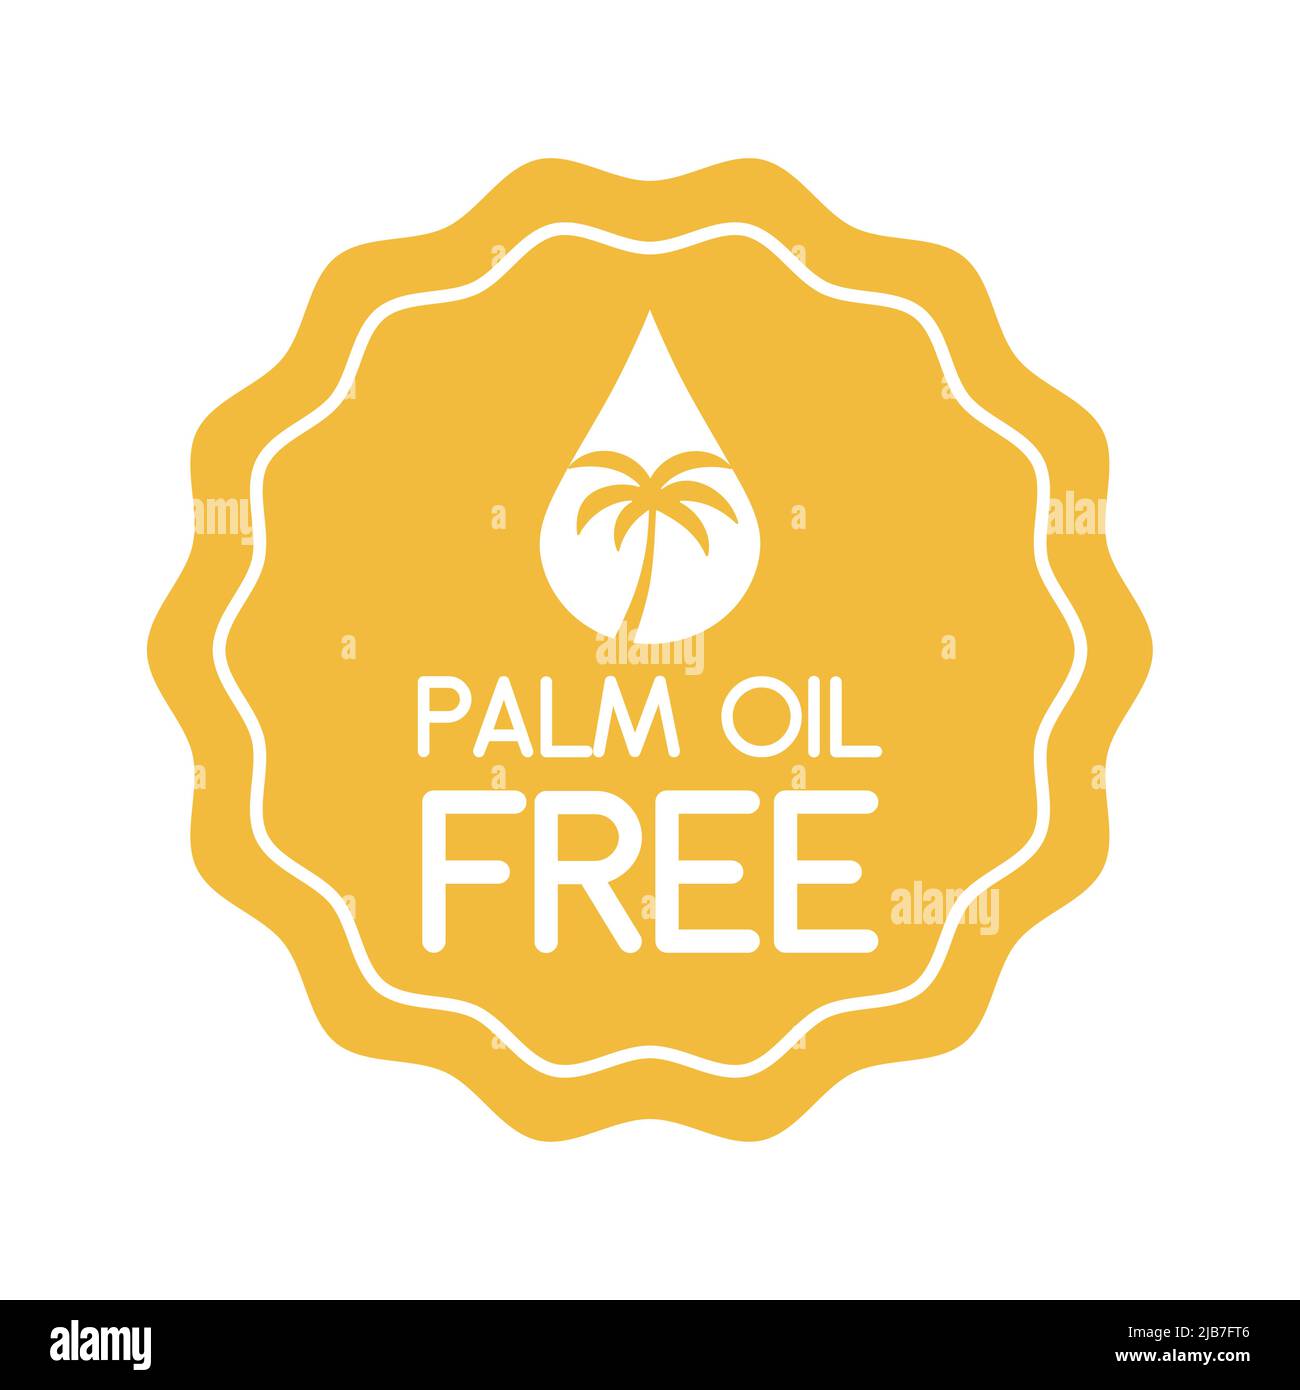 Palm oil free symbol. Organic food without saturated fats. Vector illustration Stock Vector